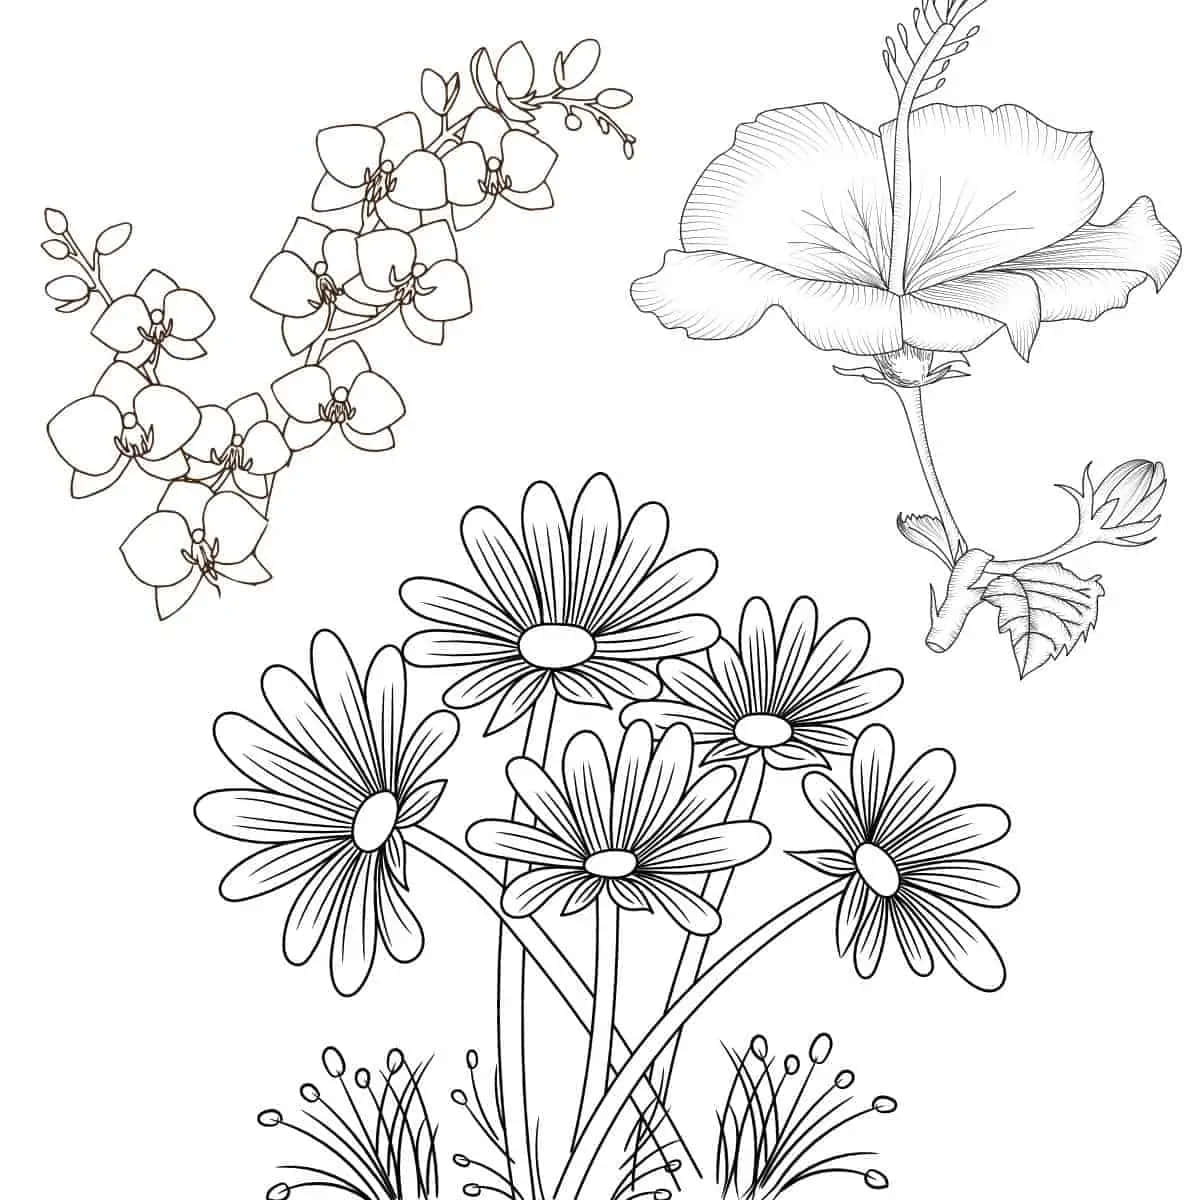 A Set Of Flowers And Leaves For Coloring